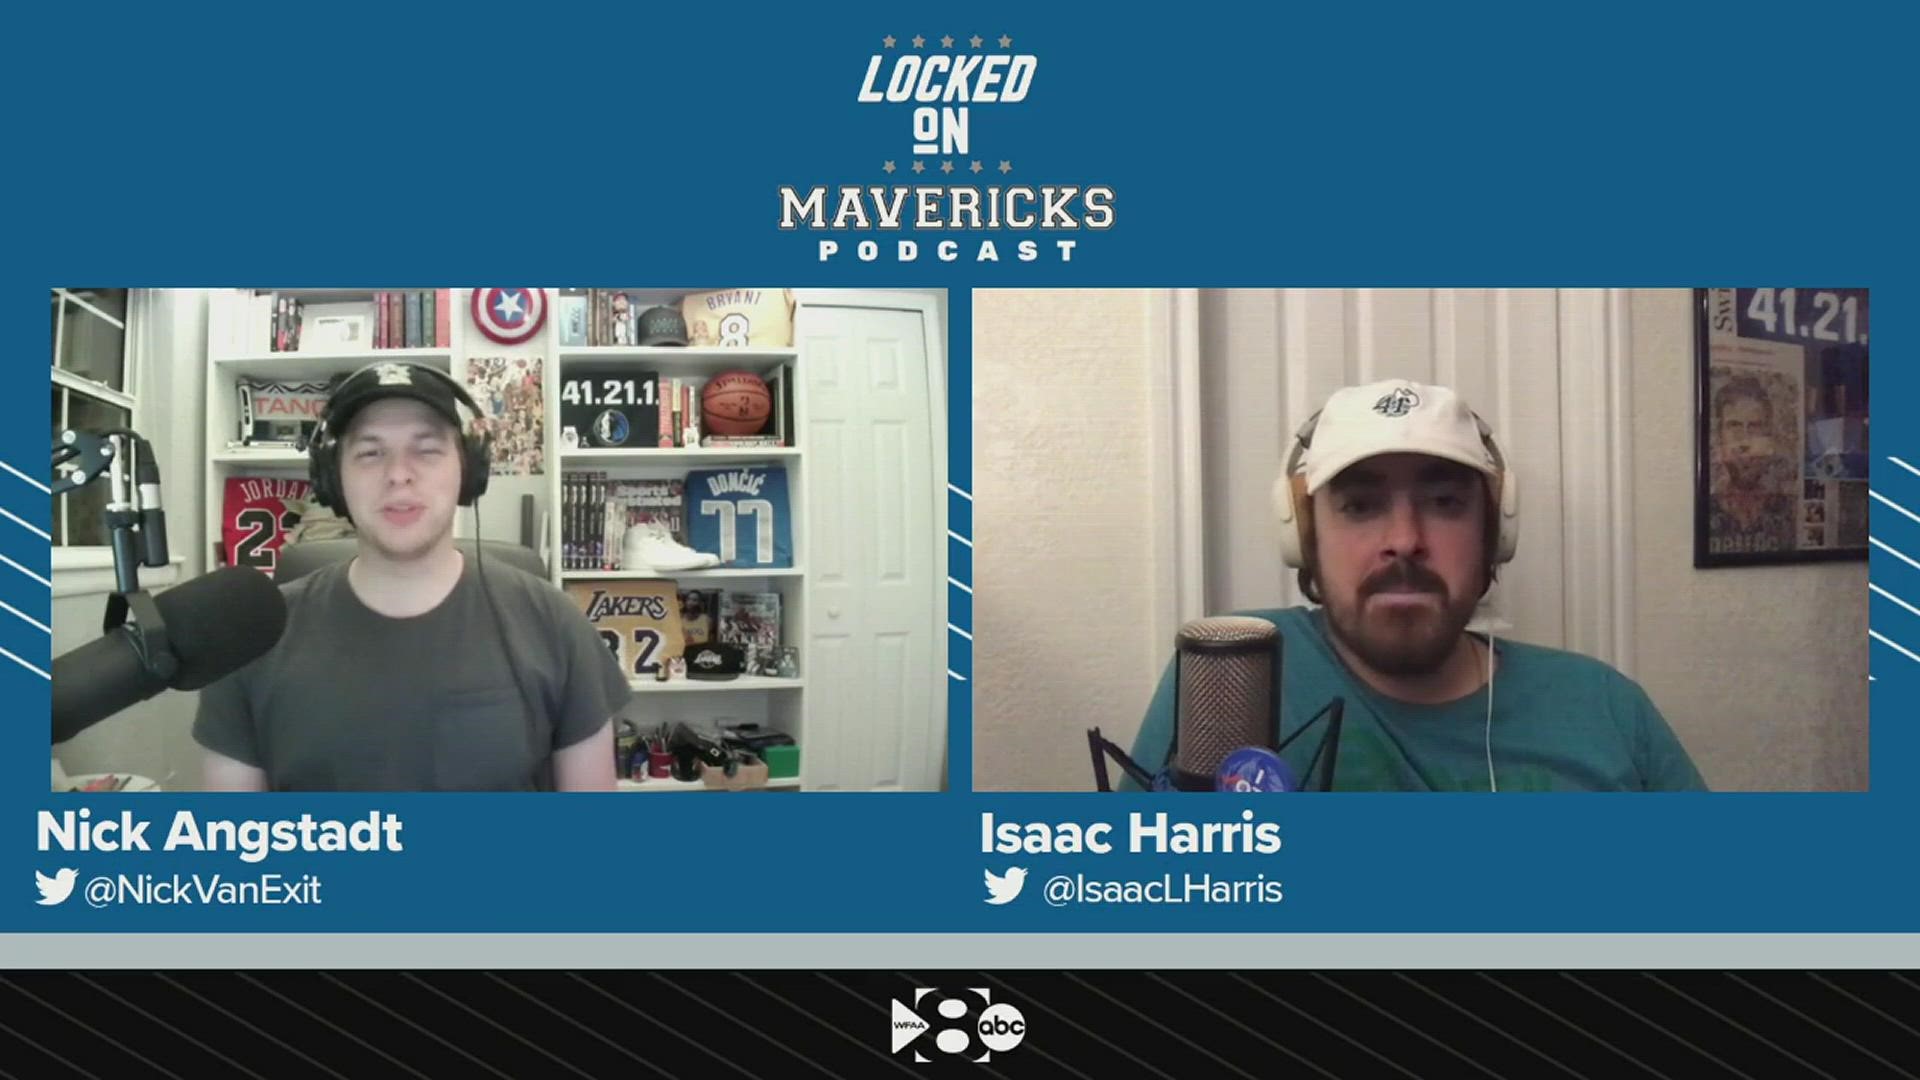 JJ Barea is leaving the Mavs after 11 seasons, and Nick Angstadt and Isaac Harris discuss his impact on the franchise.